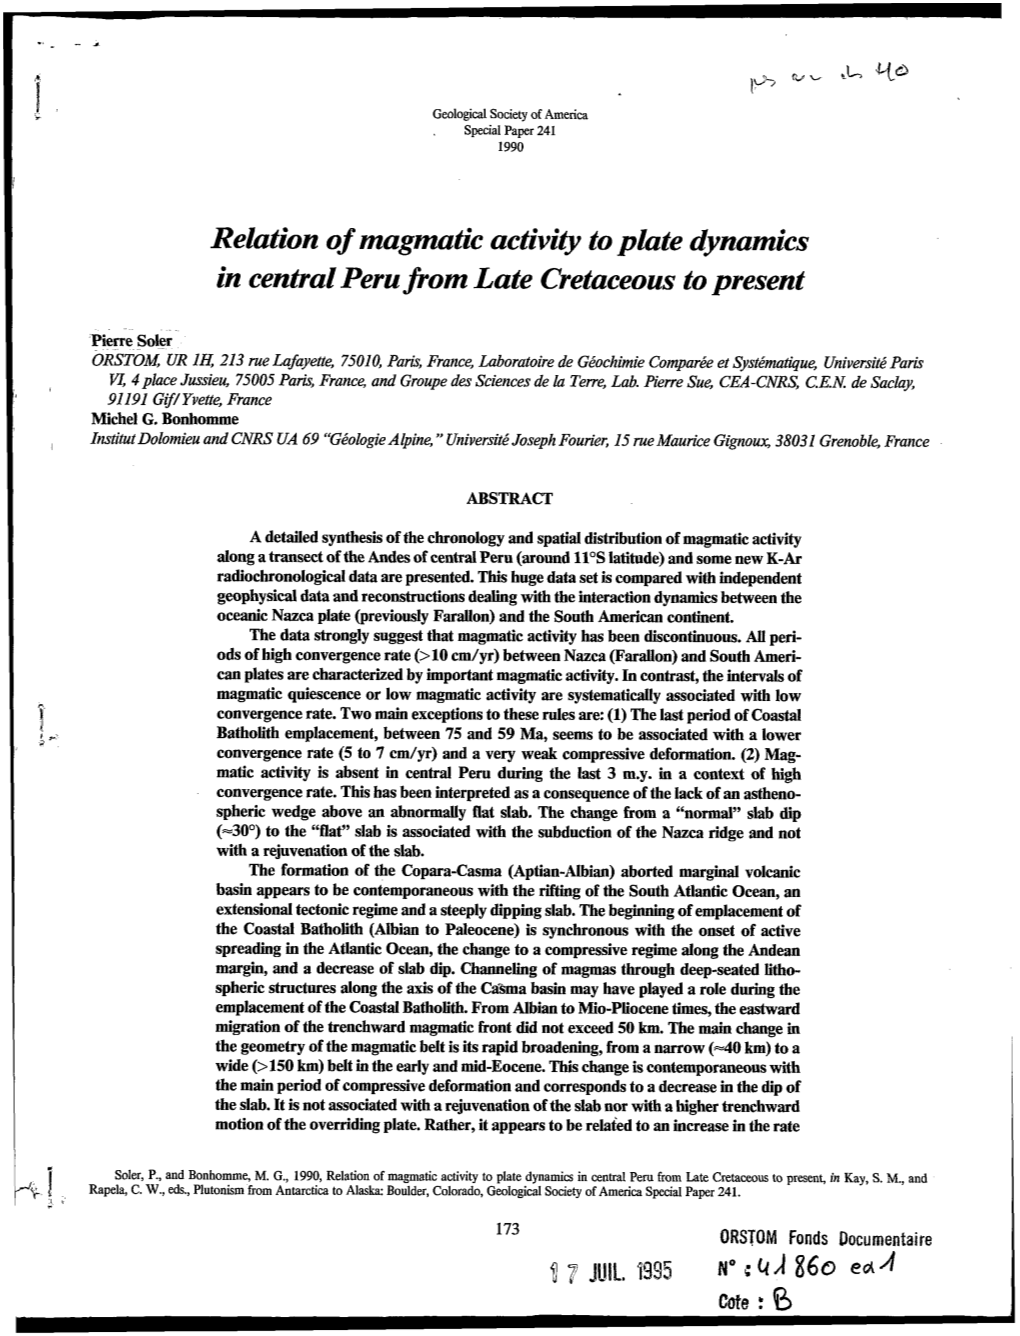 Relation of Magmatic Activity to Plate Dynamics in Central Peru from Late Cretaceous to Present, in Kay, S